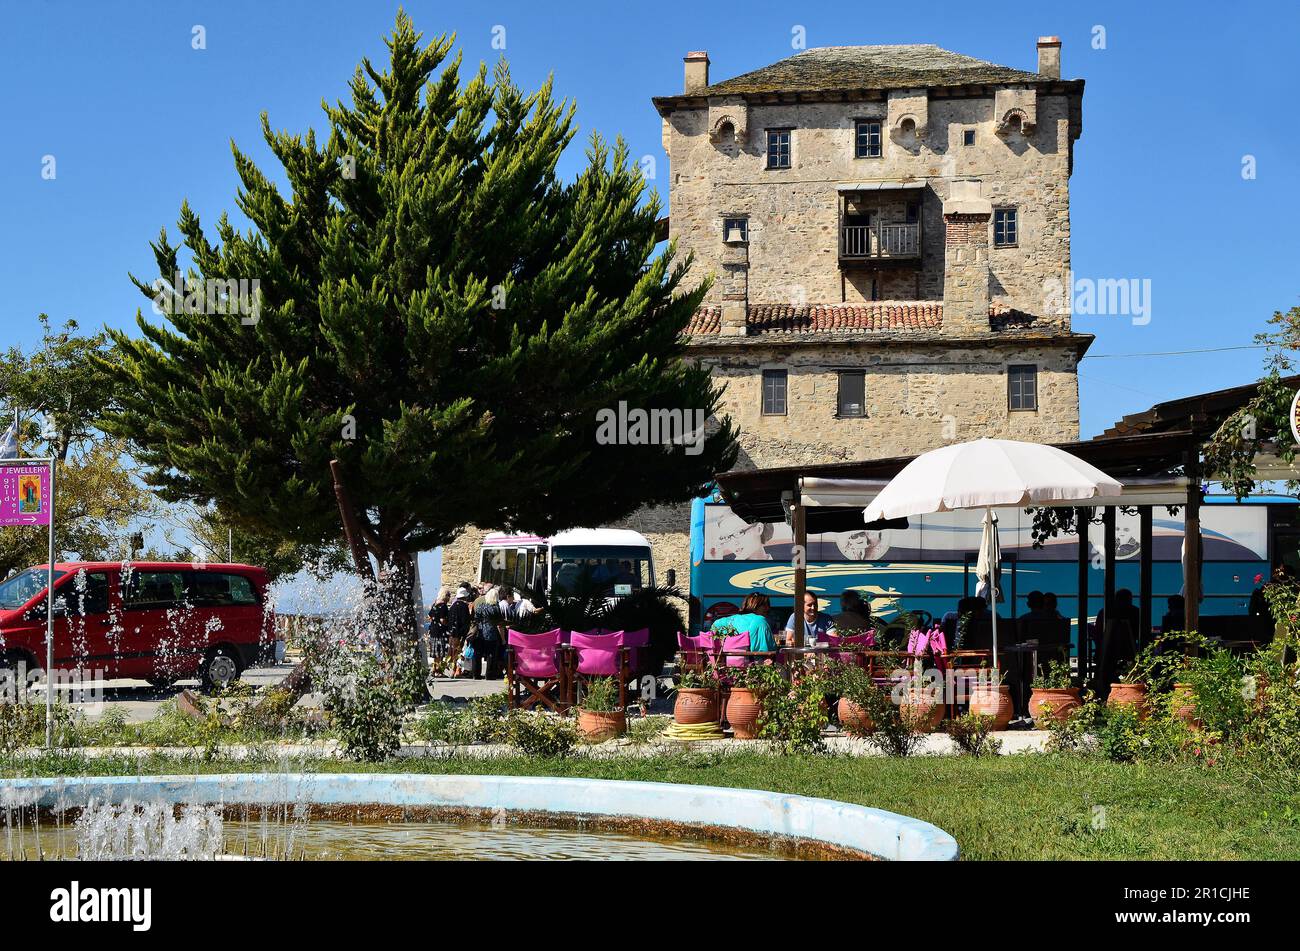 Ouranoupolis, Greece - September 29, 2011: Unidentified tourists in a restaurant in front of the Prosphorios-Tower, the landmark of the small village Stock Photo